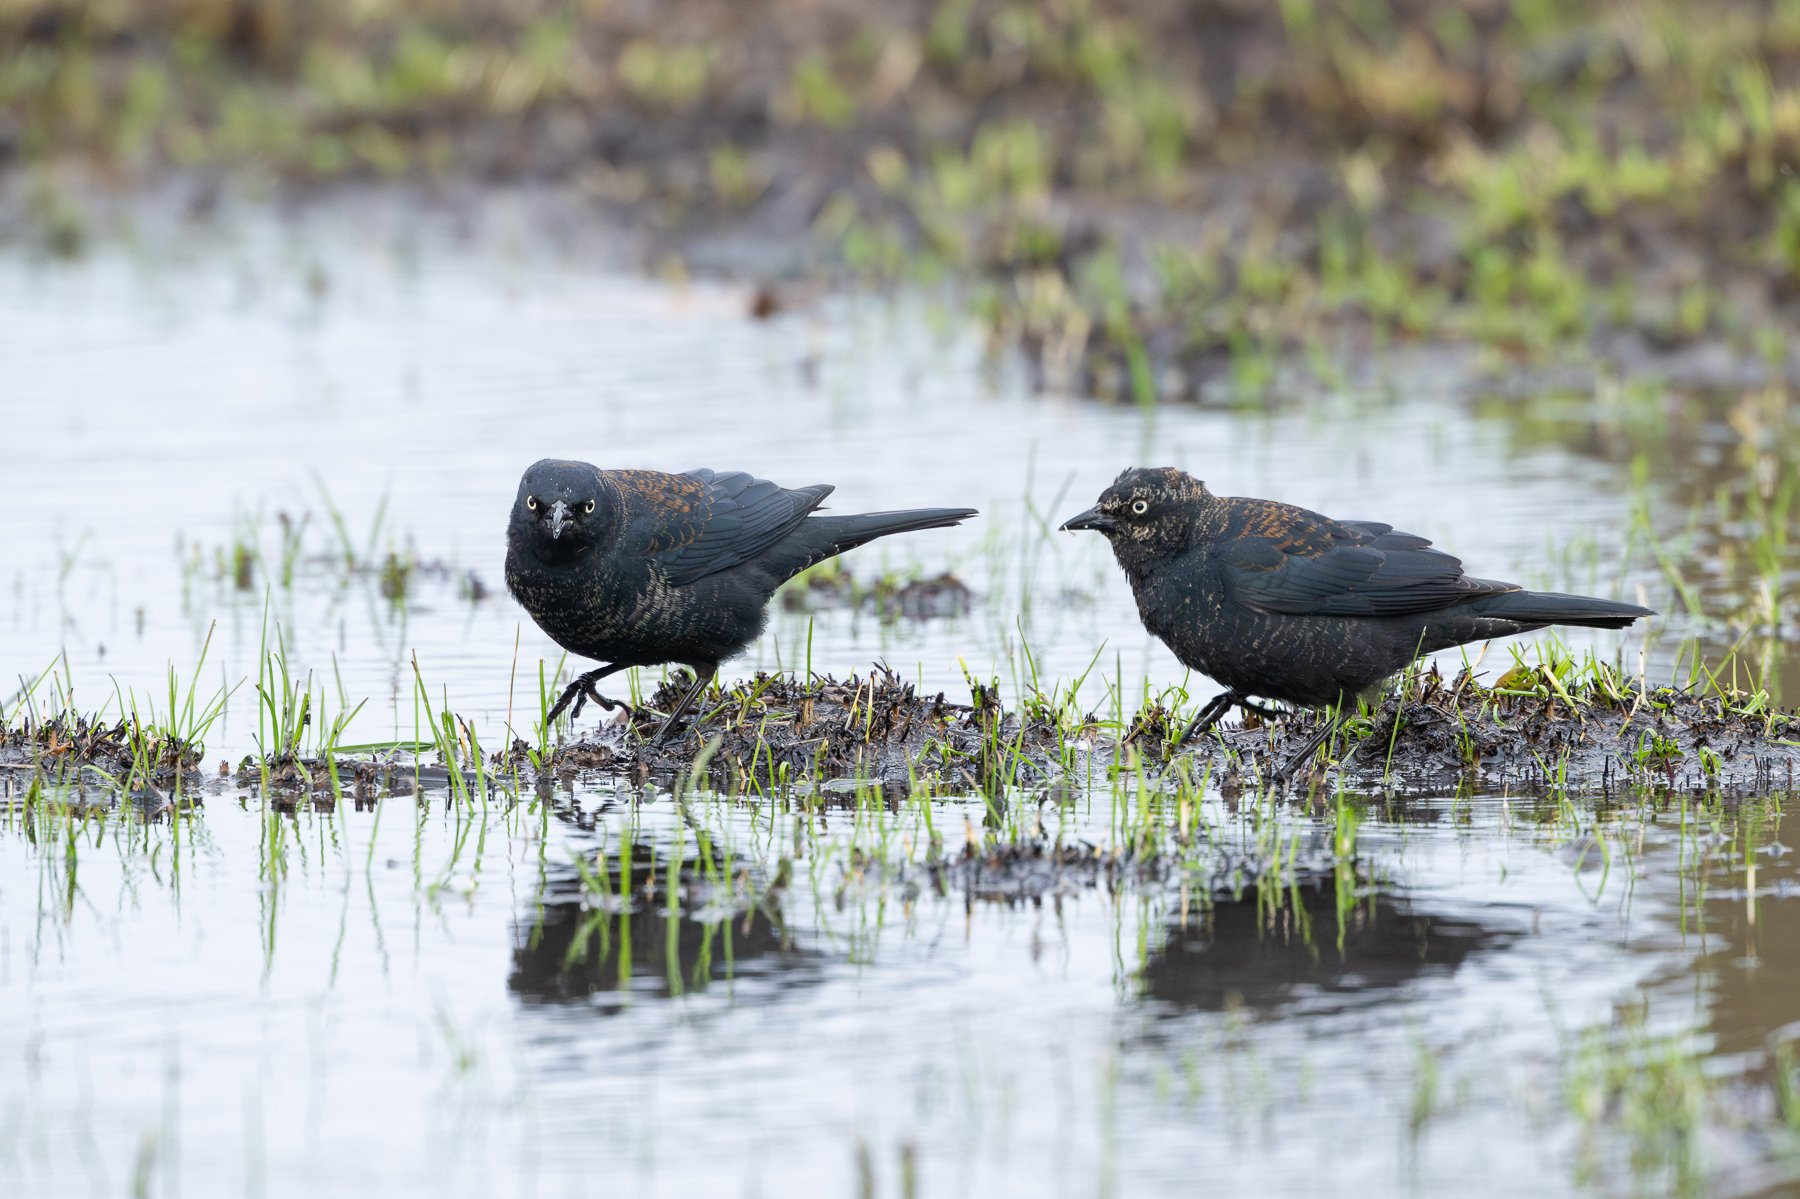   Two male Rusty Blackbirds feed in the shallows (photo by Gary Shackelford).  